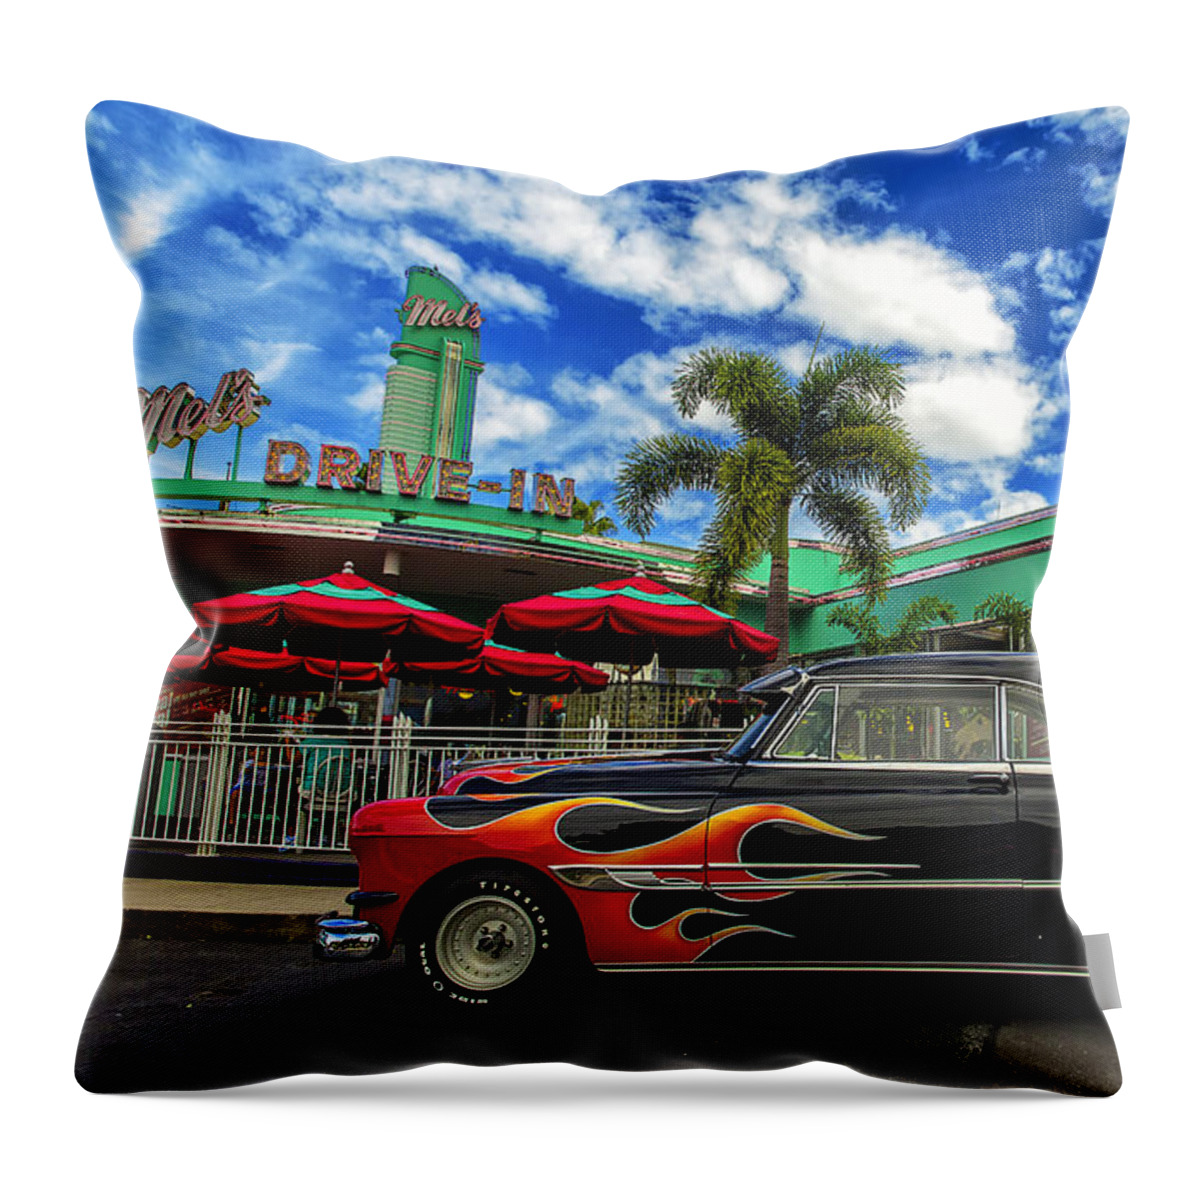 Universal Studios Throw Pillow featuring the photograph Mel's Drive In by Bill and Linda Tiepelman